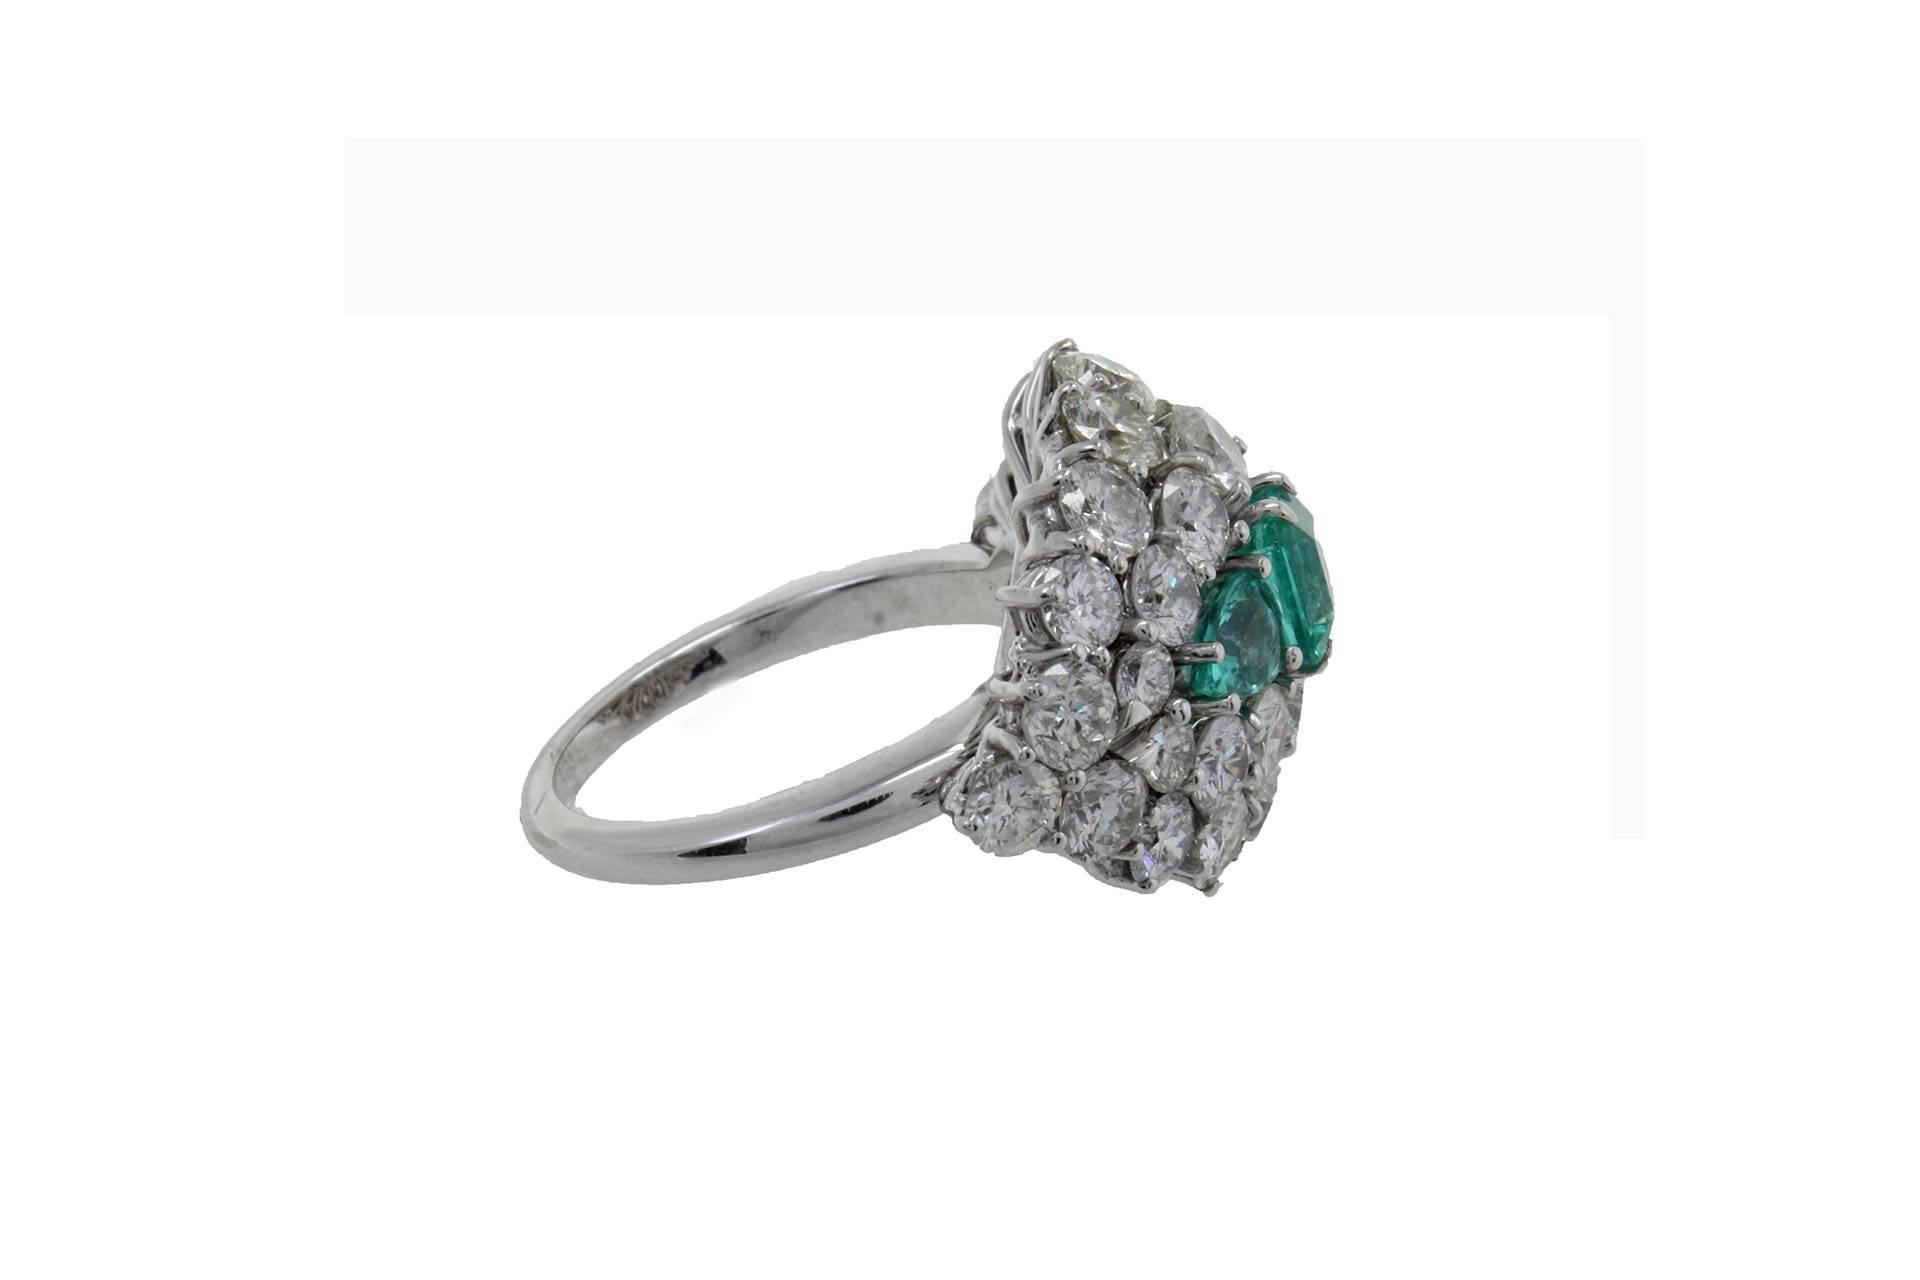 shipping policy: 
No additional costs will be added to this order.
Shipping costs will be totally covered by the seller (customs duties included). 

Charming dome ring in 14Kt white gold composed of a trilogy of emeralds surrounded by